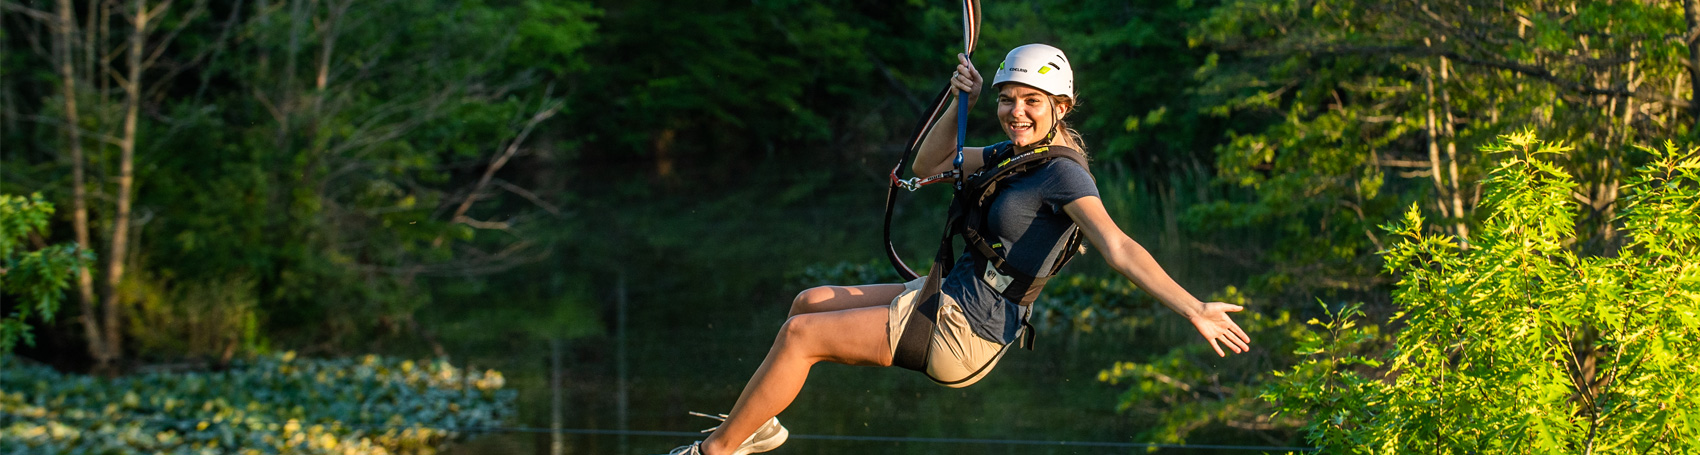 Smiling girl on a zipline with her left arm sticking out